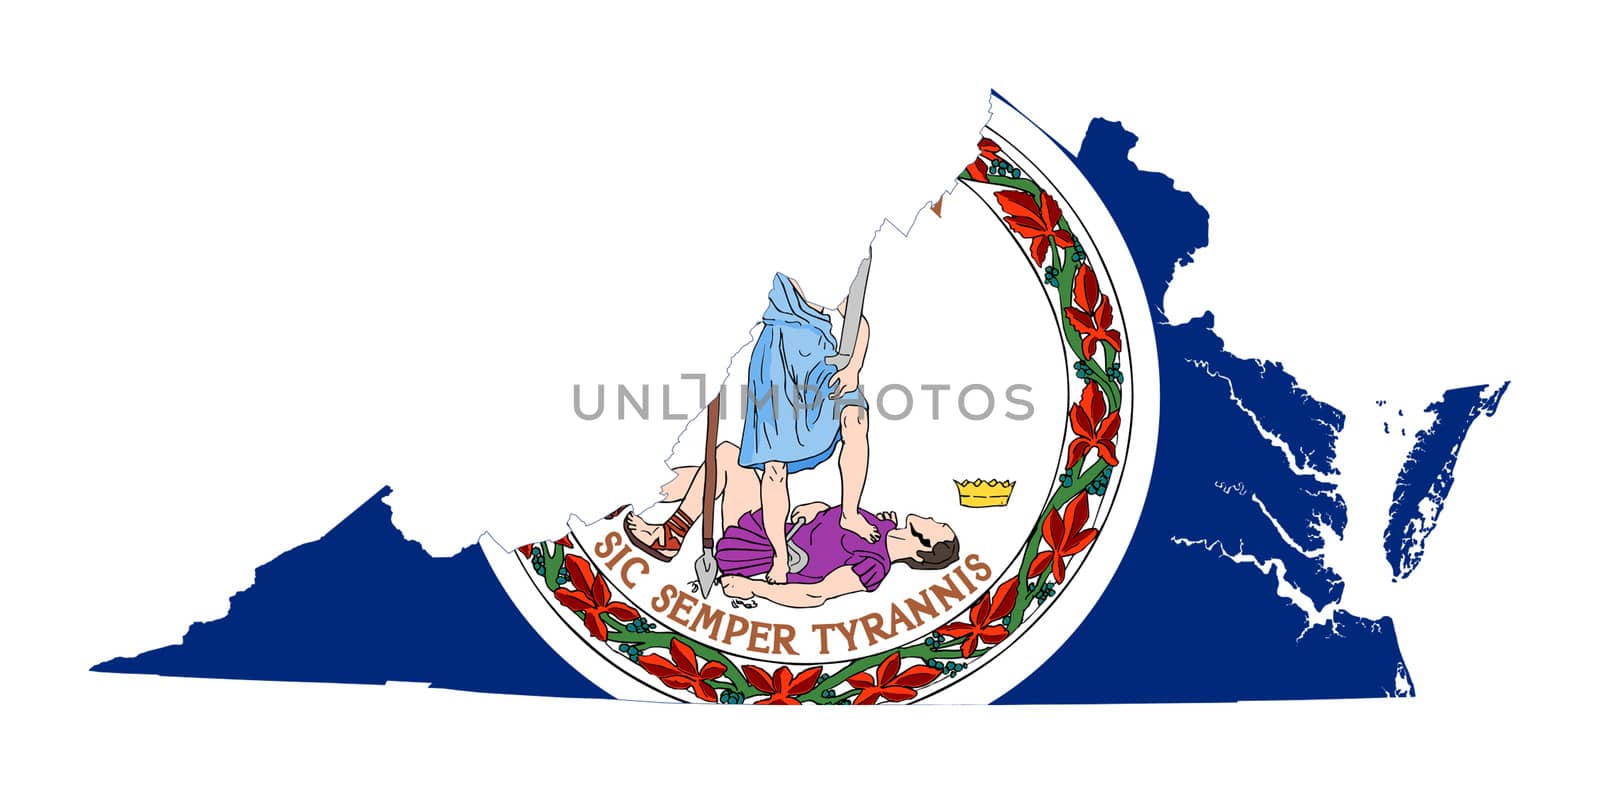 State of Virginia flag map isolated on a white background, U.S.A.
